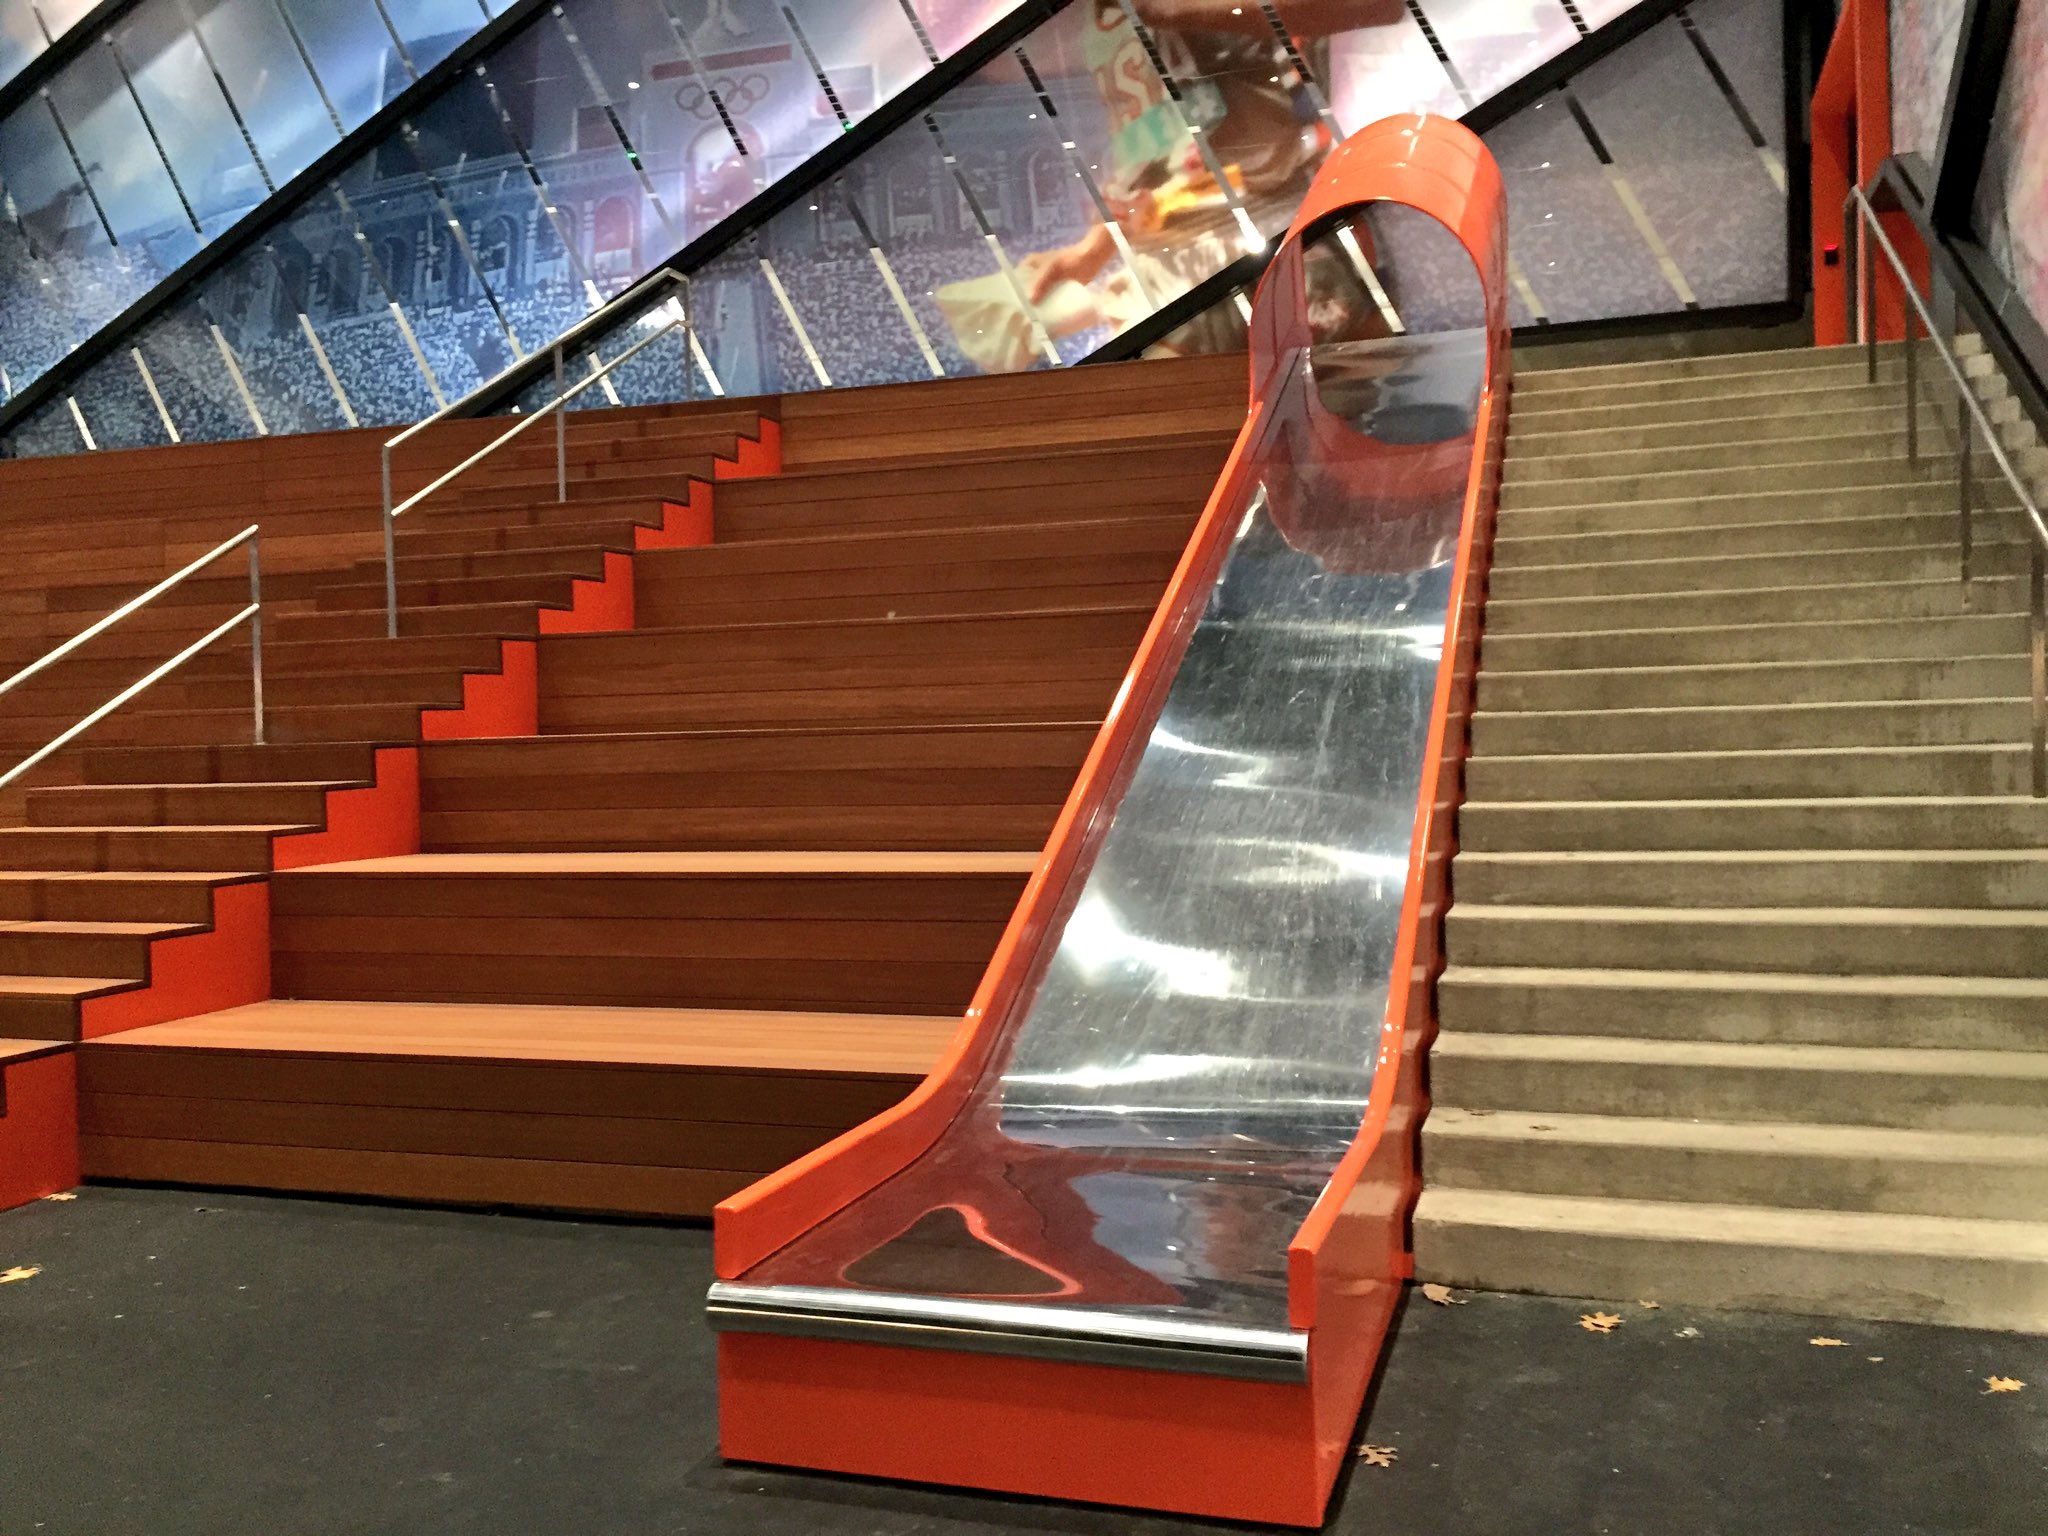 Mike Warner on X: "AWESOME! I was at an event at @Nike yesterday. This is a  parking garage, where you can skip the stairs and just slide down!  #LiveOnK2 #slide https://t.co/Q8tAKTAKGL" /